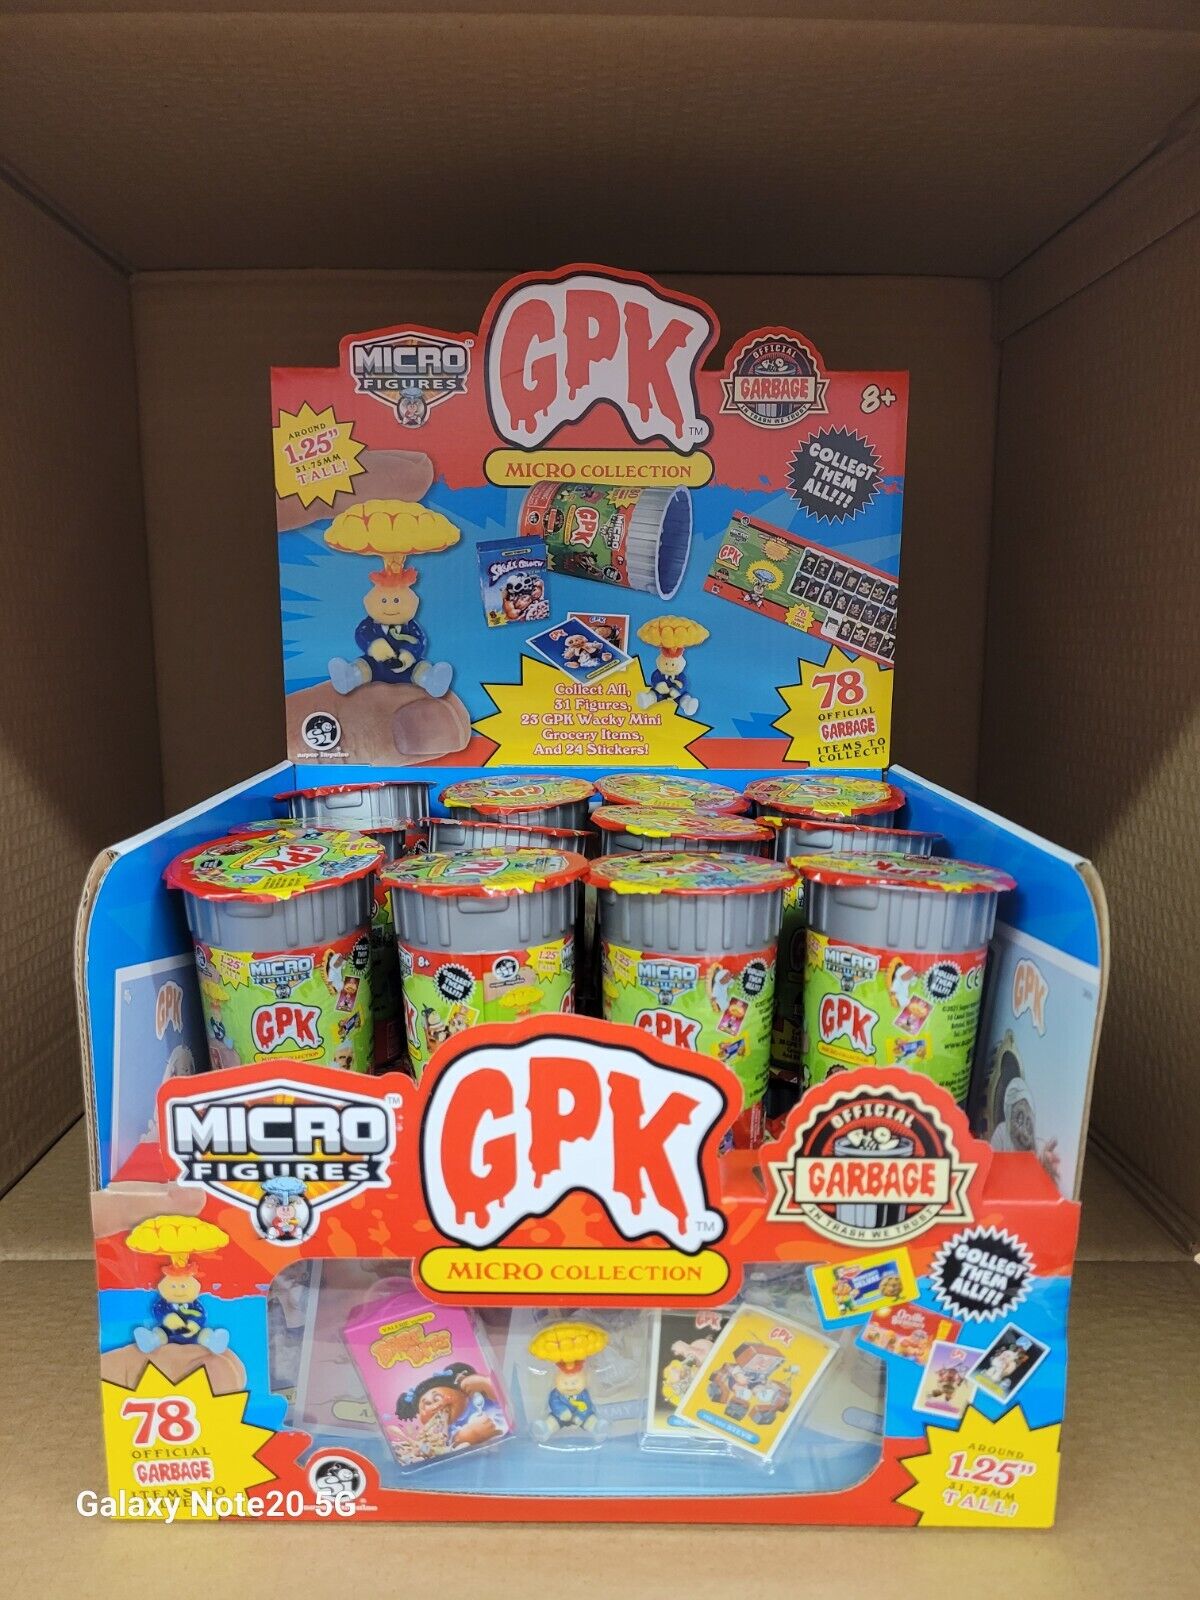 GARBAGE PAIL KIDS Series 1 Collection MICRO FIGURES Box Of 24 Pieces Brand New